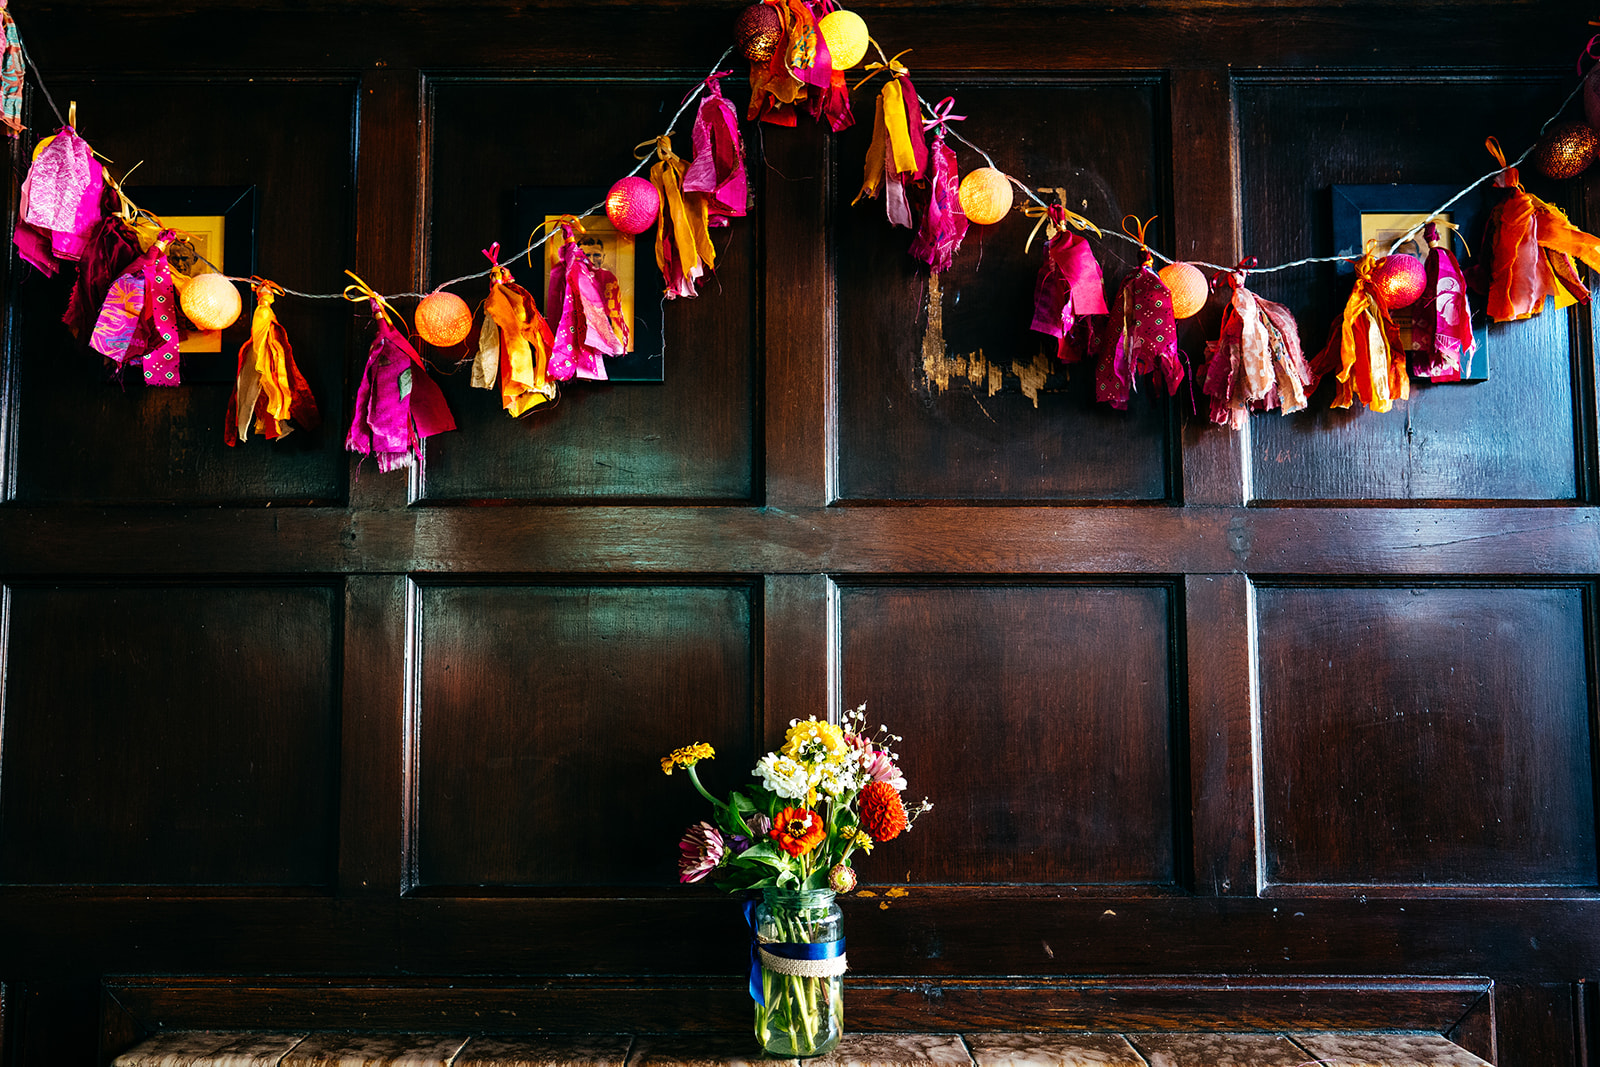 Bride made all her own wedding decorations pictured flowers and tassels in hot orange and pink